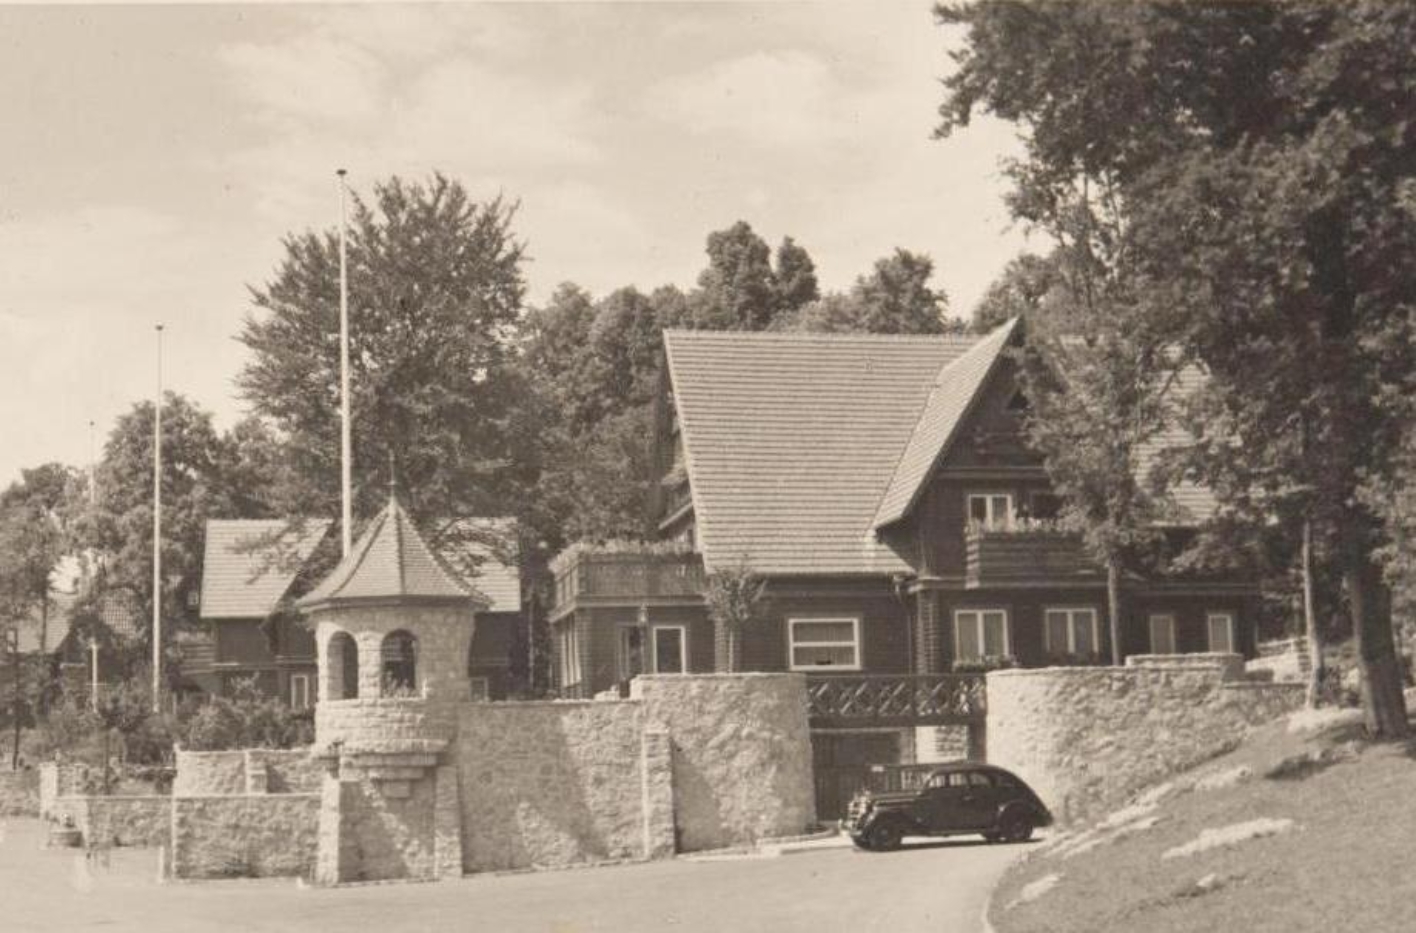 General view of the Villa Koch in the Führersiedlung. The house in Heimatstil is surrounded by an ornamental wall with corner turrets. A car is parked in front of the driveway. In the background two more villas.